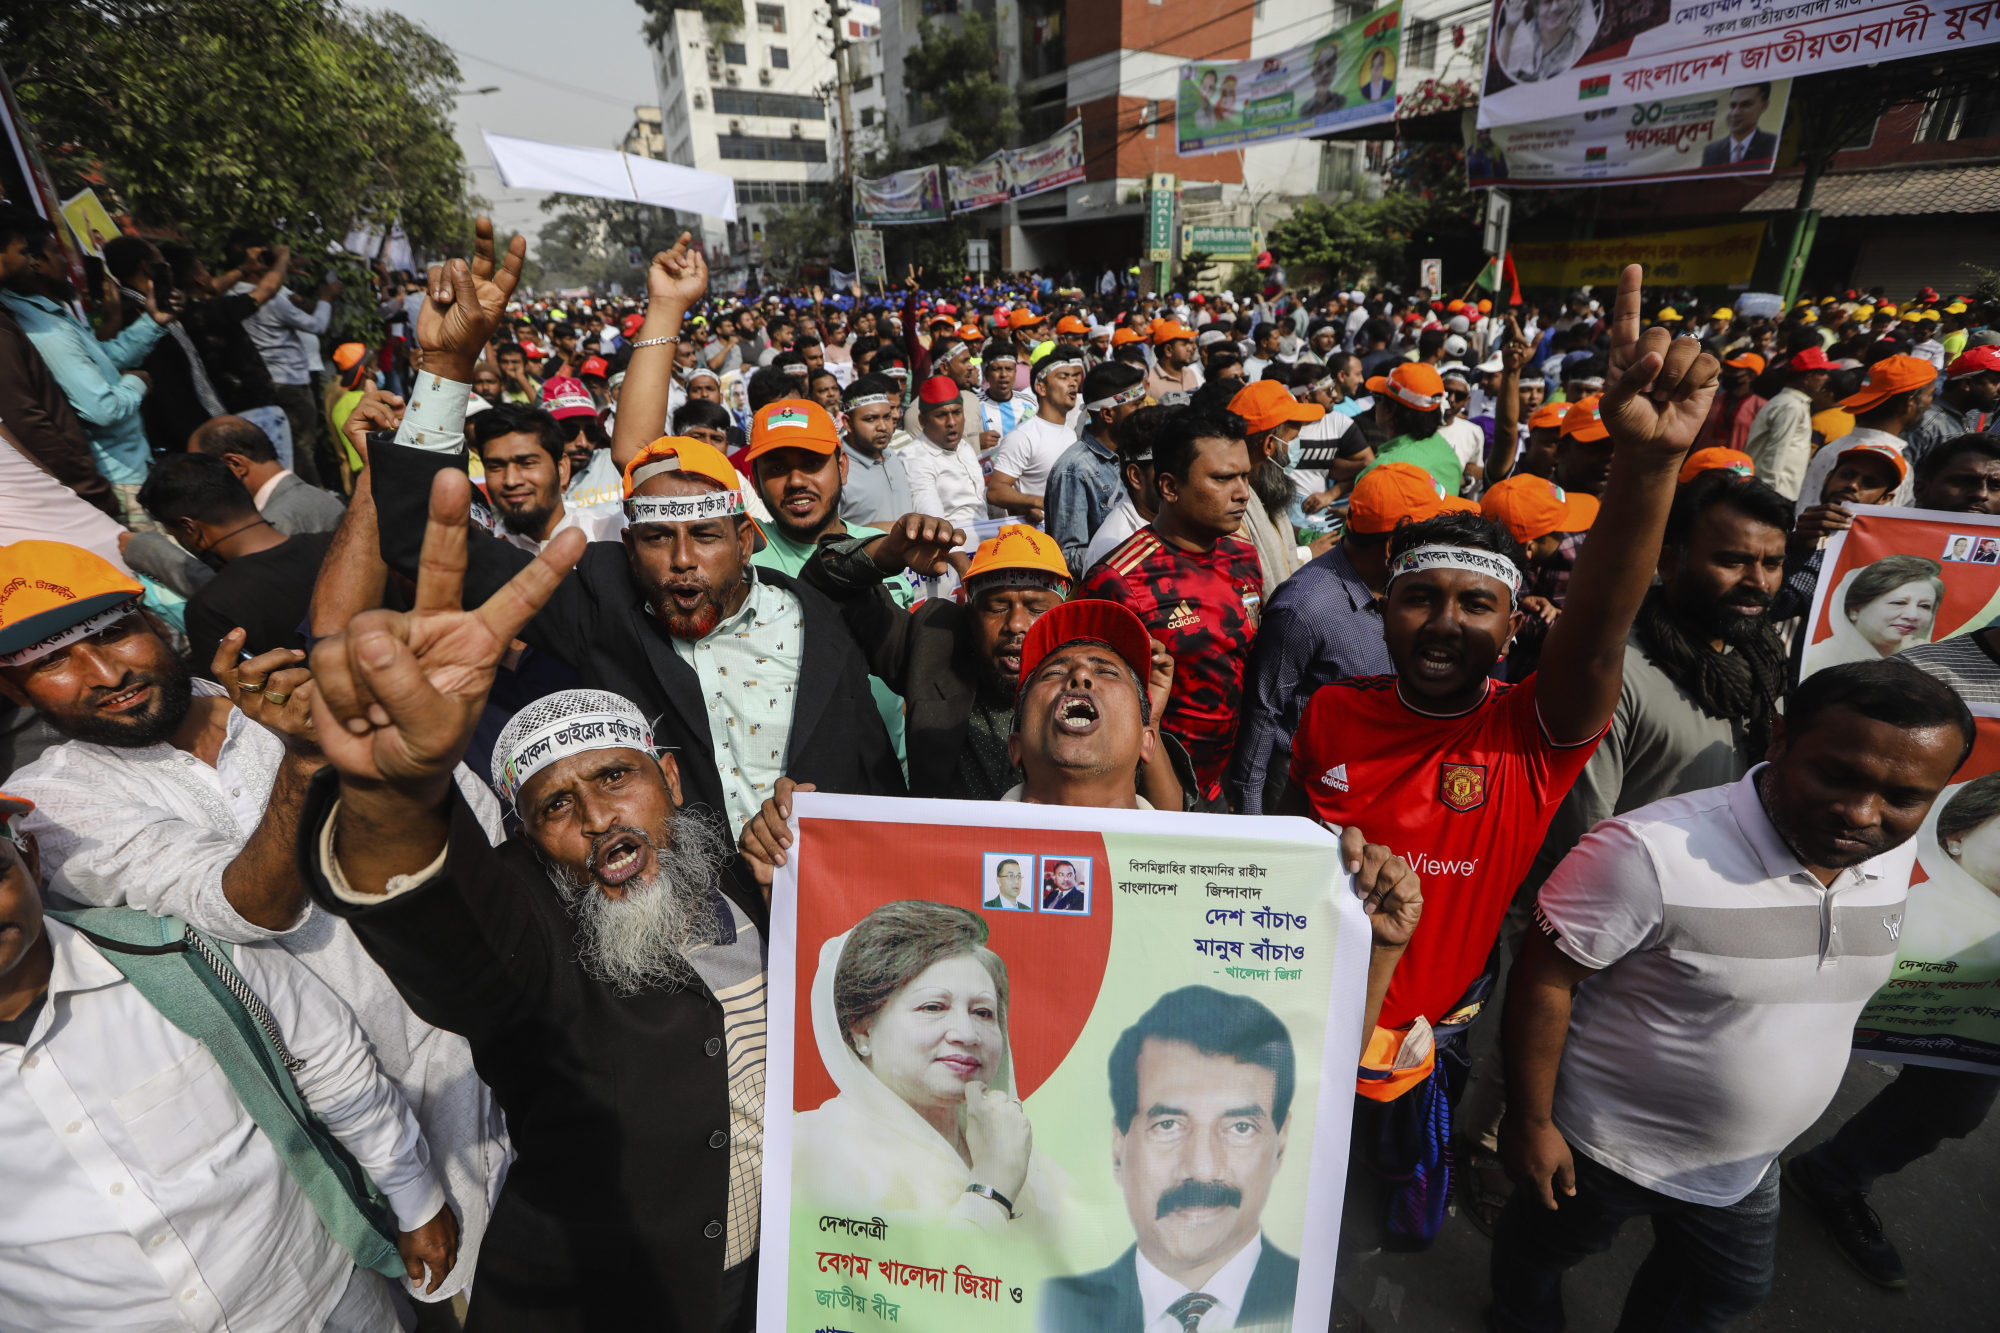 Tens of thousands of supporters of the Bangladesh Nationalist Party, headed by former prime minister Khaleda Zia, shout slogans calling for Sheikh Hasina’s resignation during a rally in Dhaka in December. Photo: AP